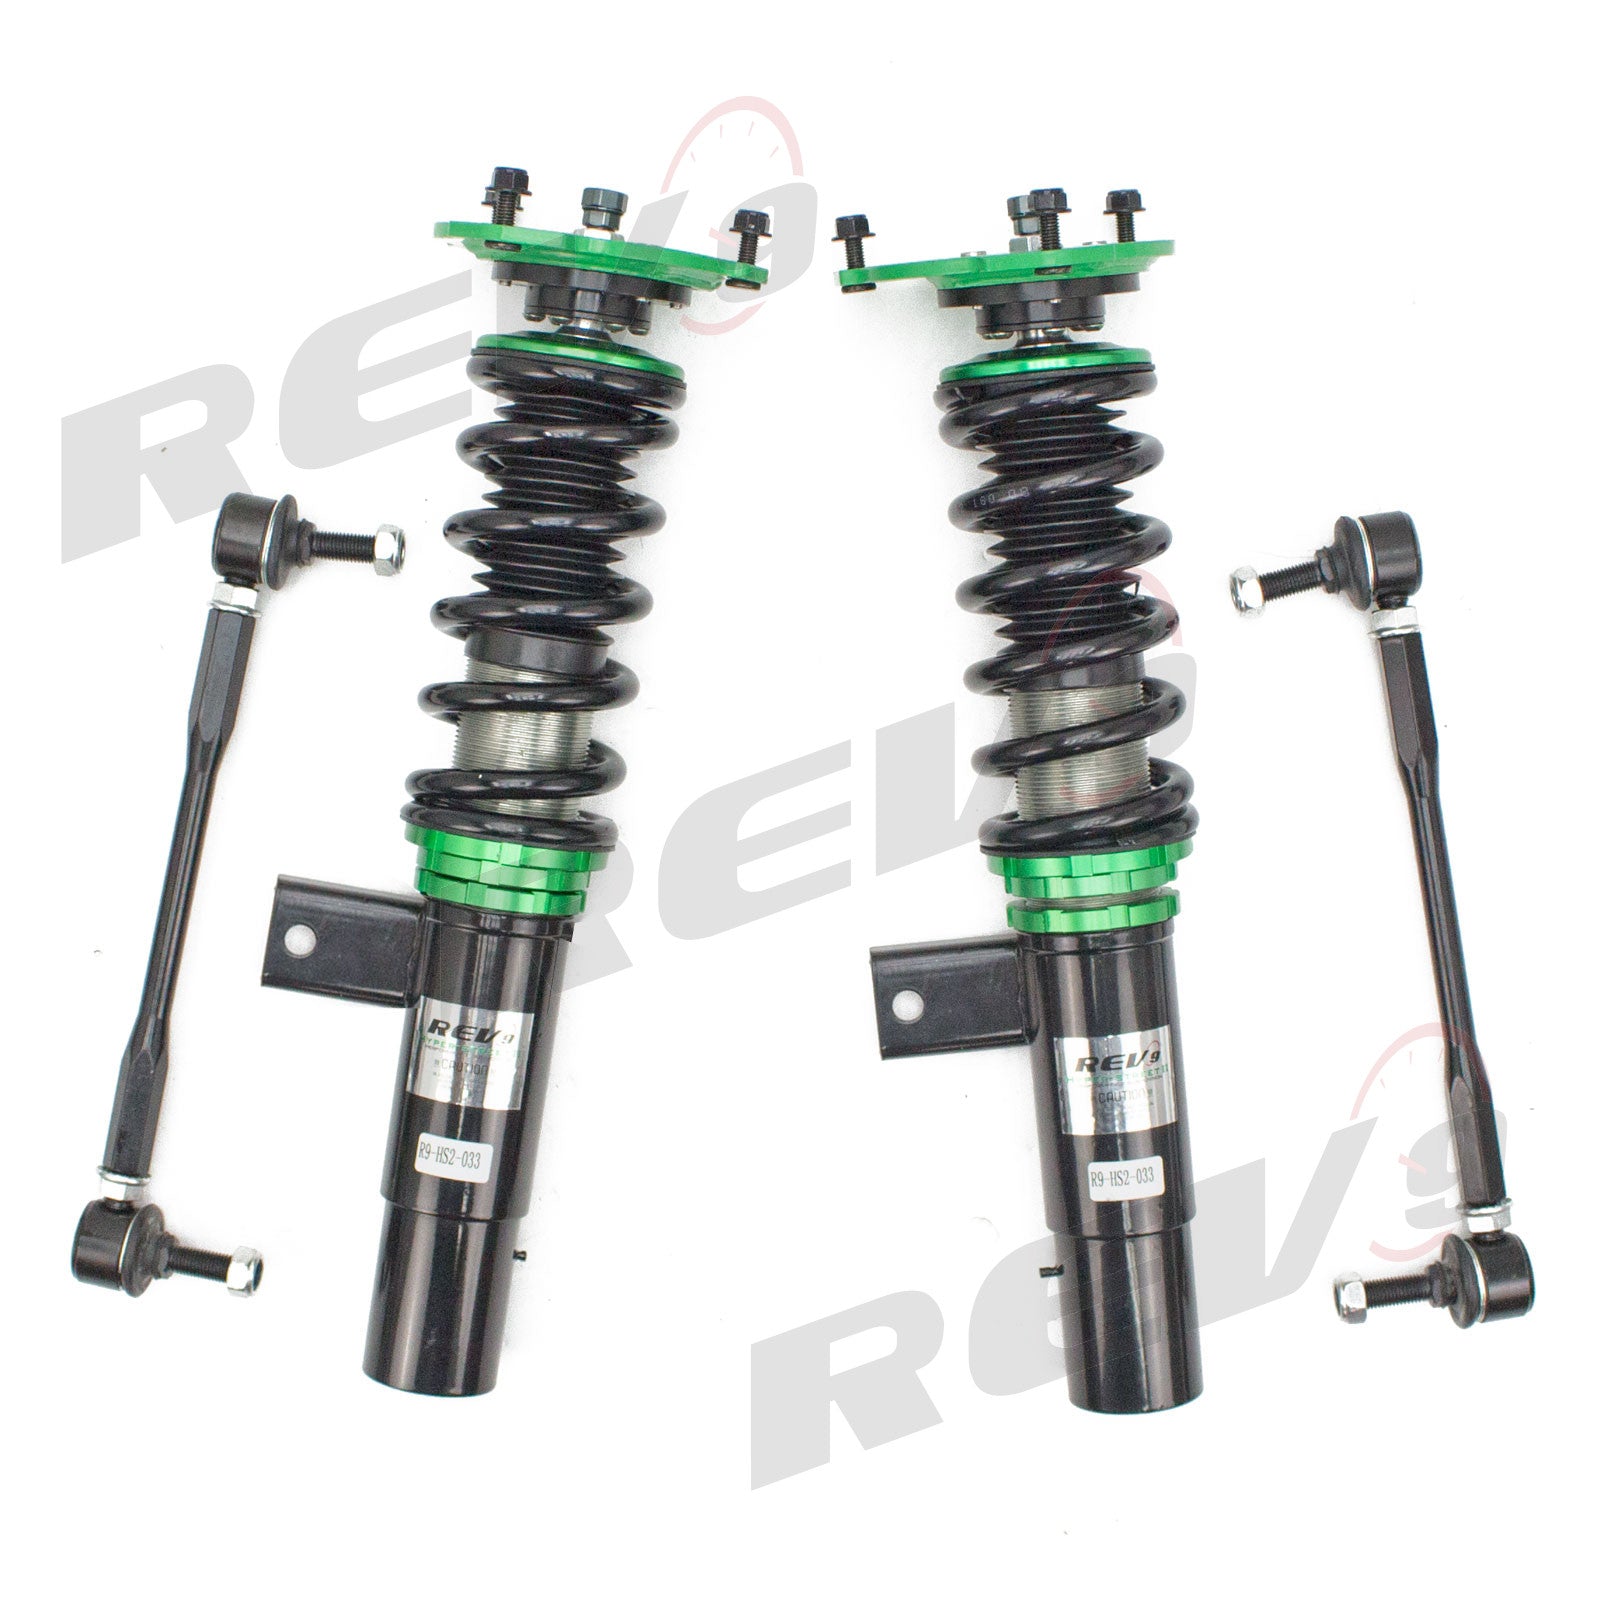 Rev9 Compatible with Audi A3 FWD (8V) 2013-15 Hyper-Street II Coilovers Kit w/ 32-Way Damping Force Adjustment(49.5mm)